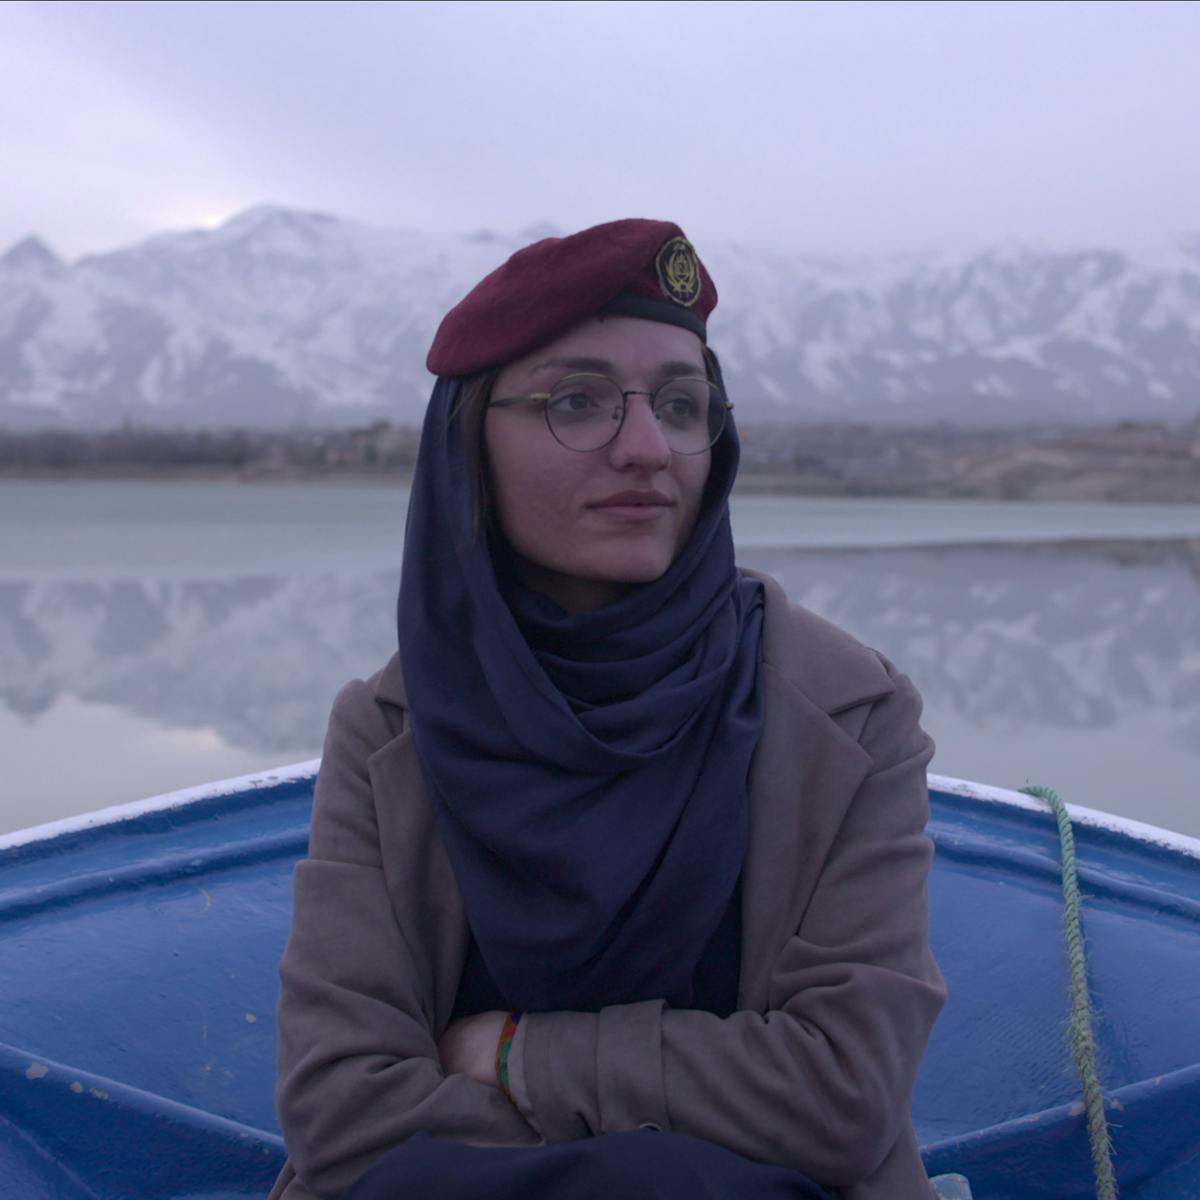 Zarifa Ghafari wears a grey jacket and sits in a blue boat, drifting on a very still body of water, framed by some mountains. 